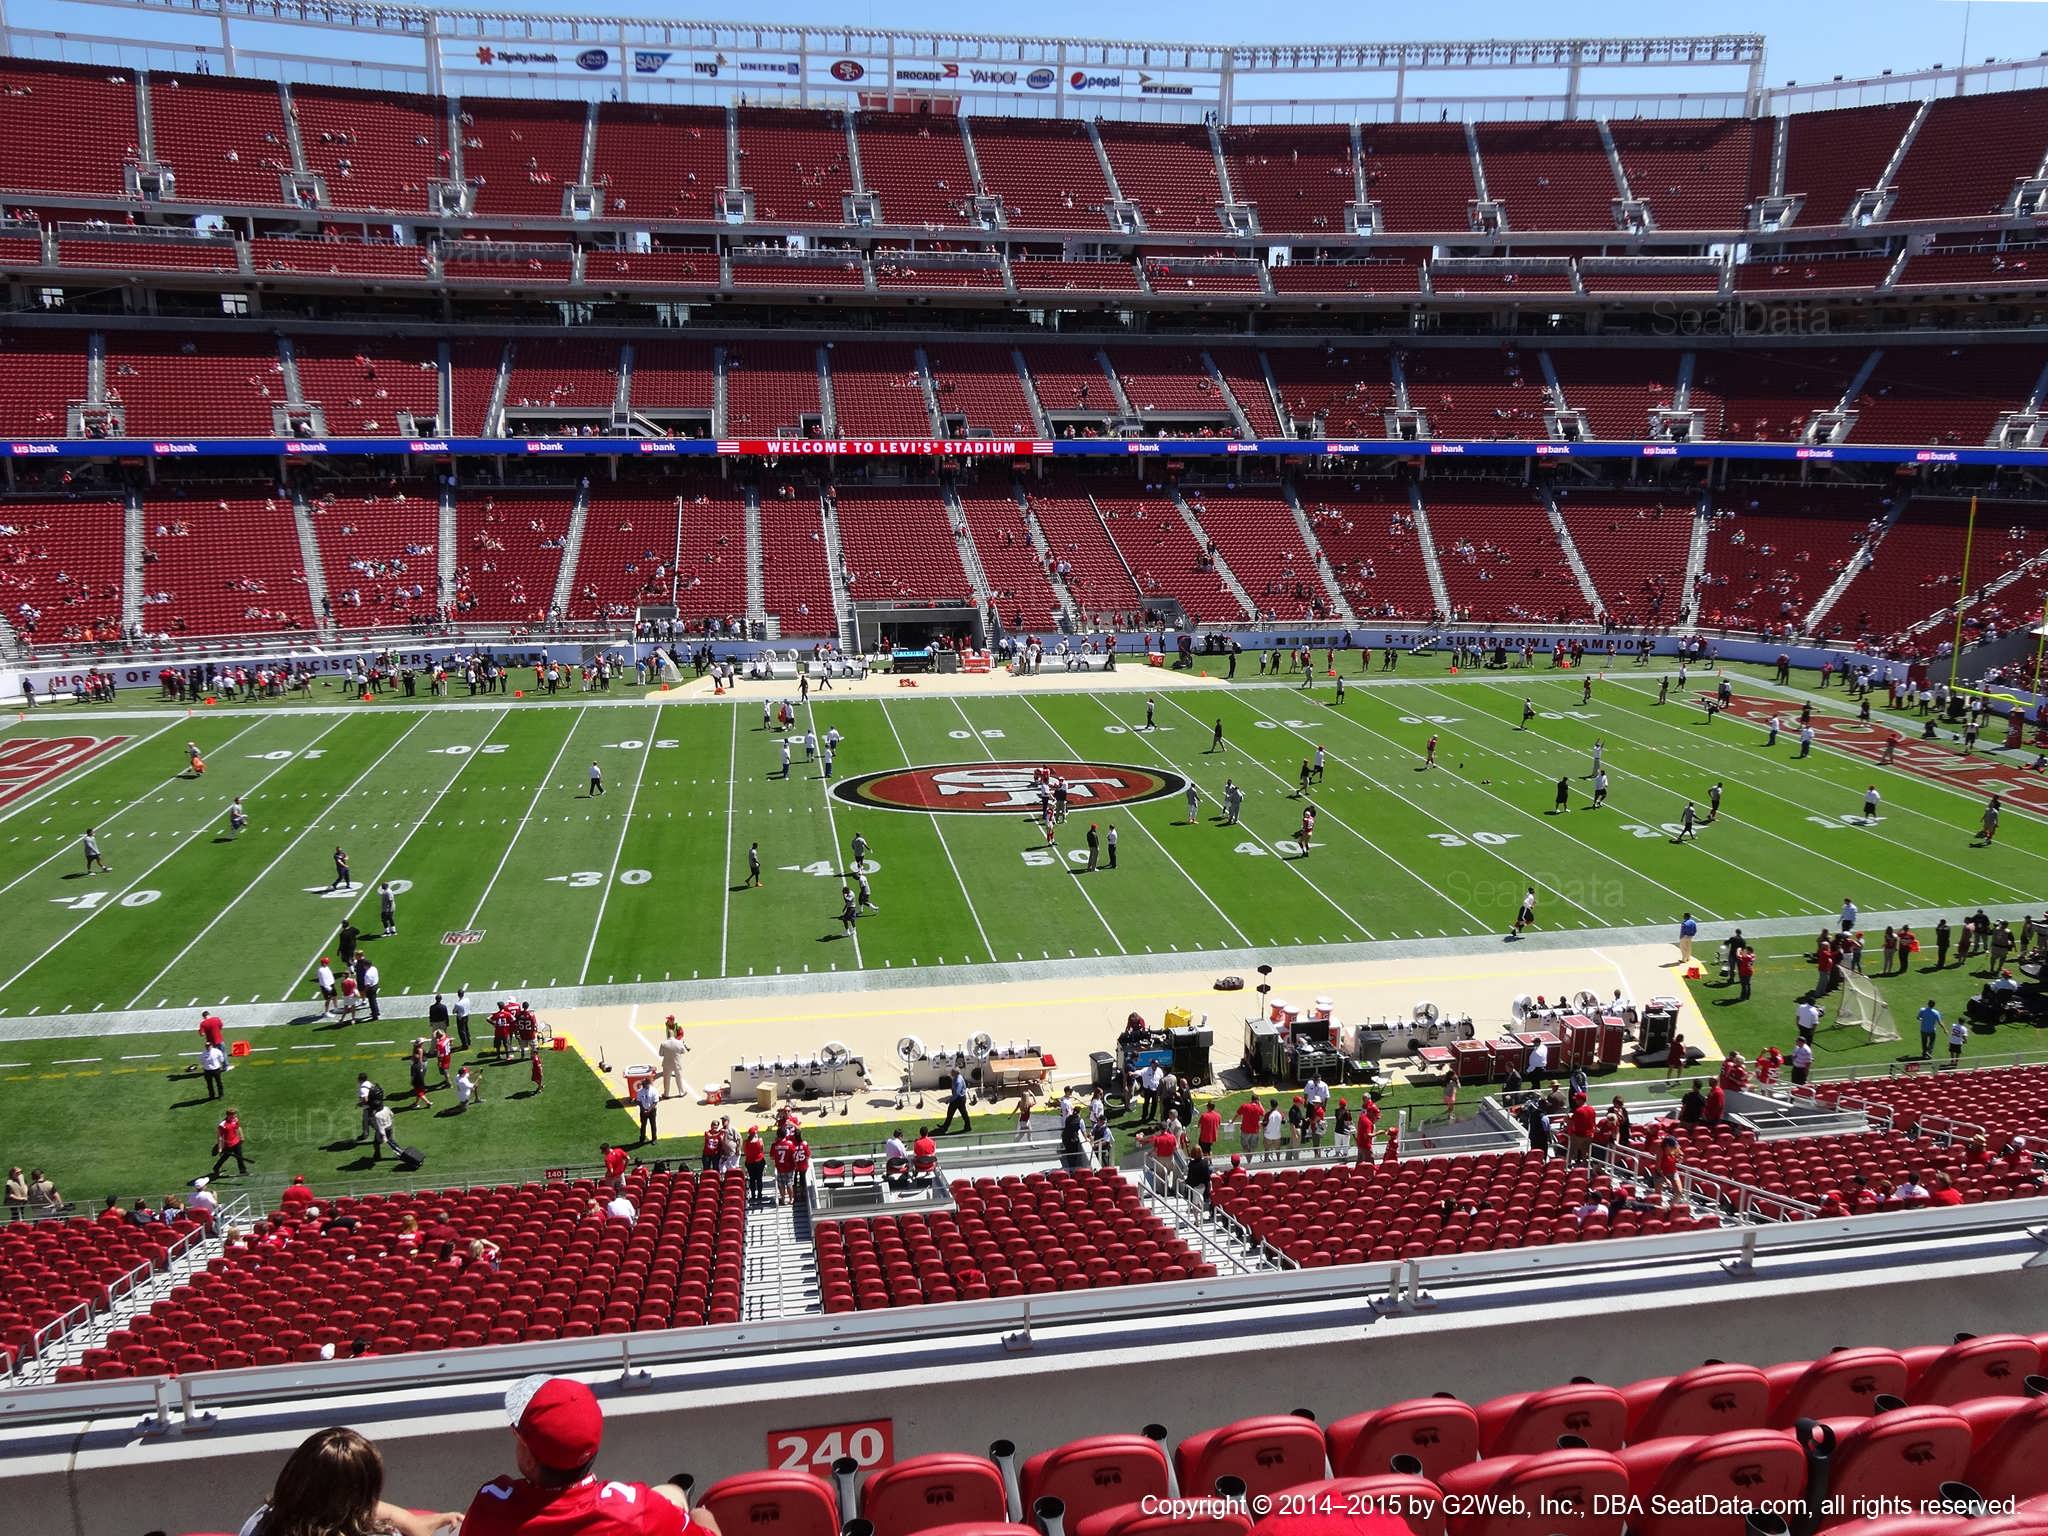 Seat view from section 240 at Levi’s Stadium, home of the San Francisco 49ers